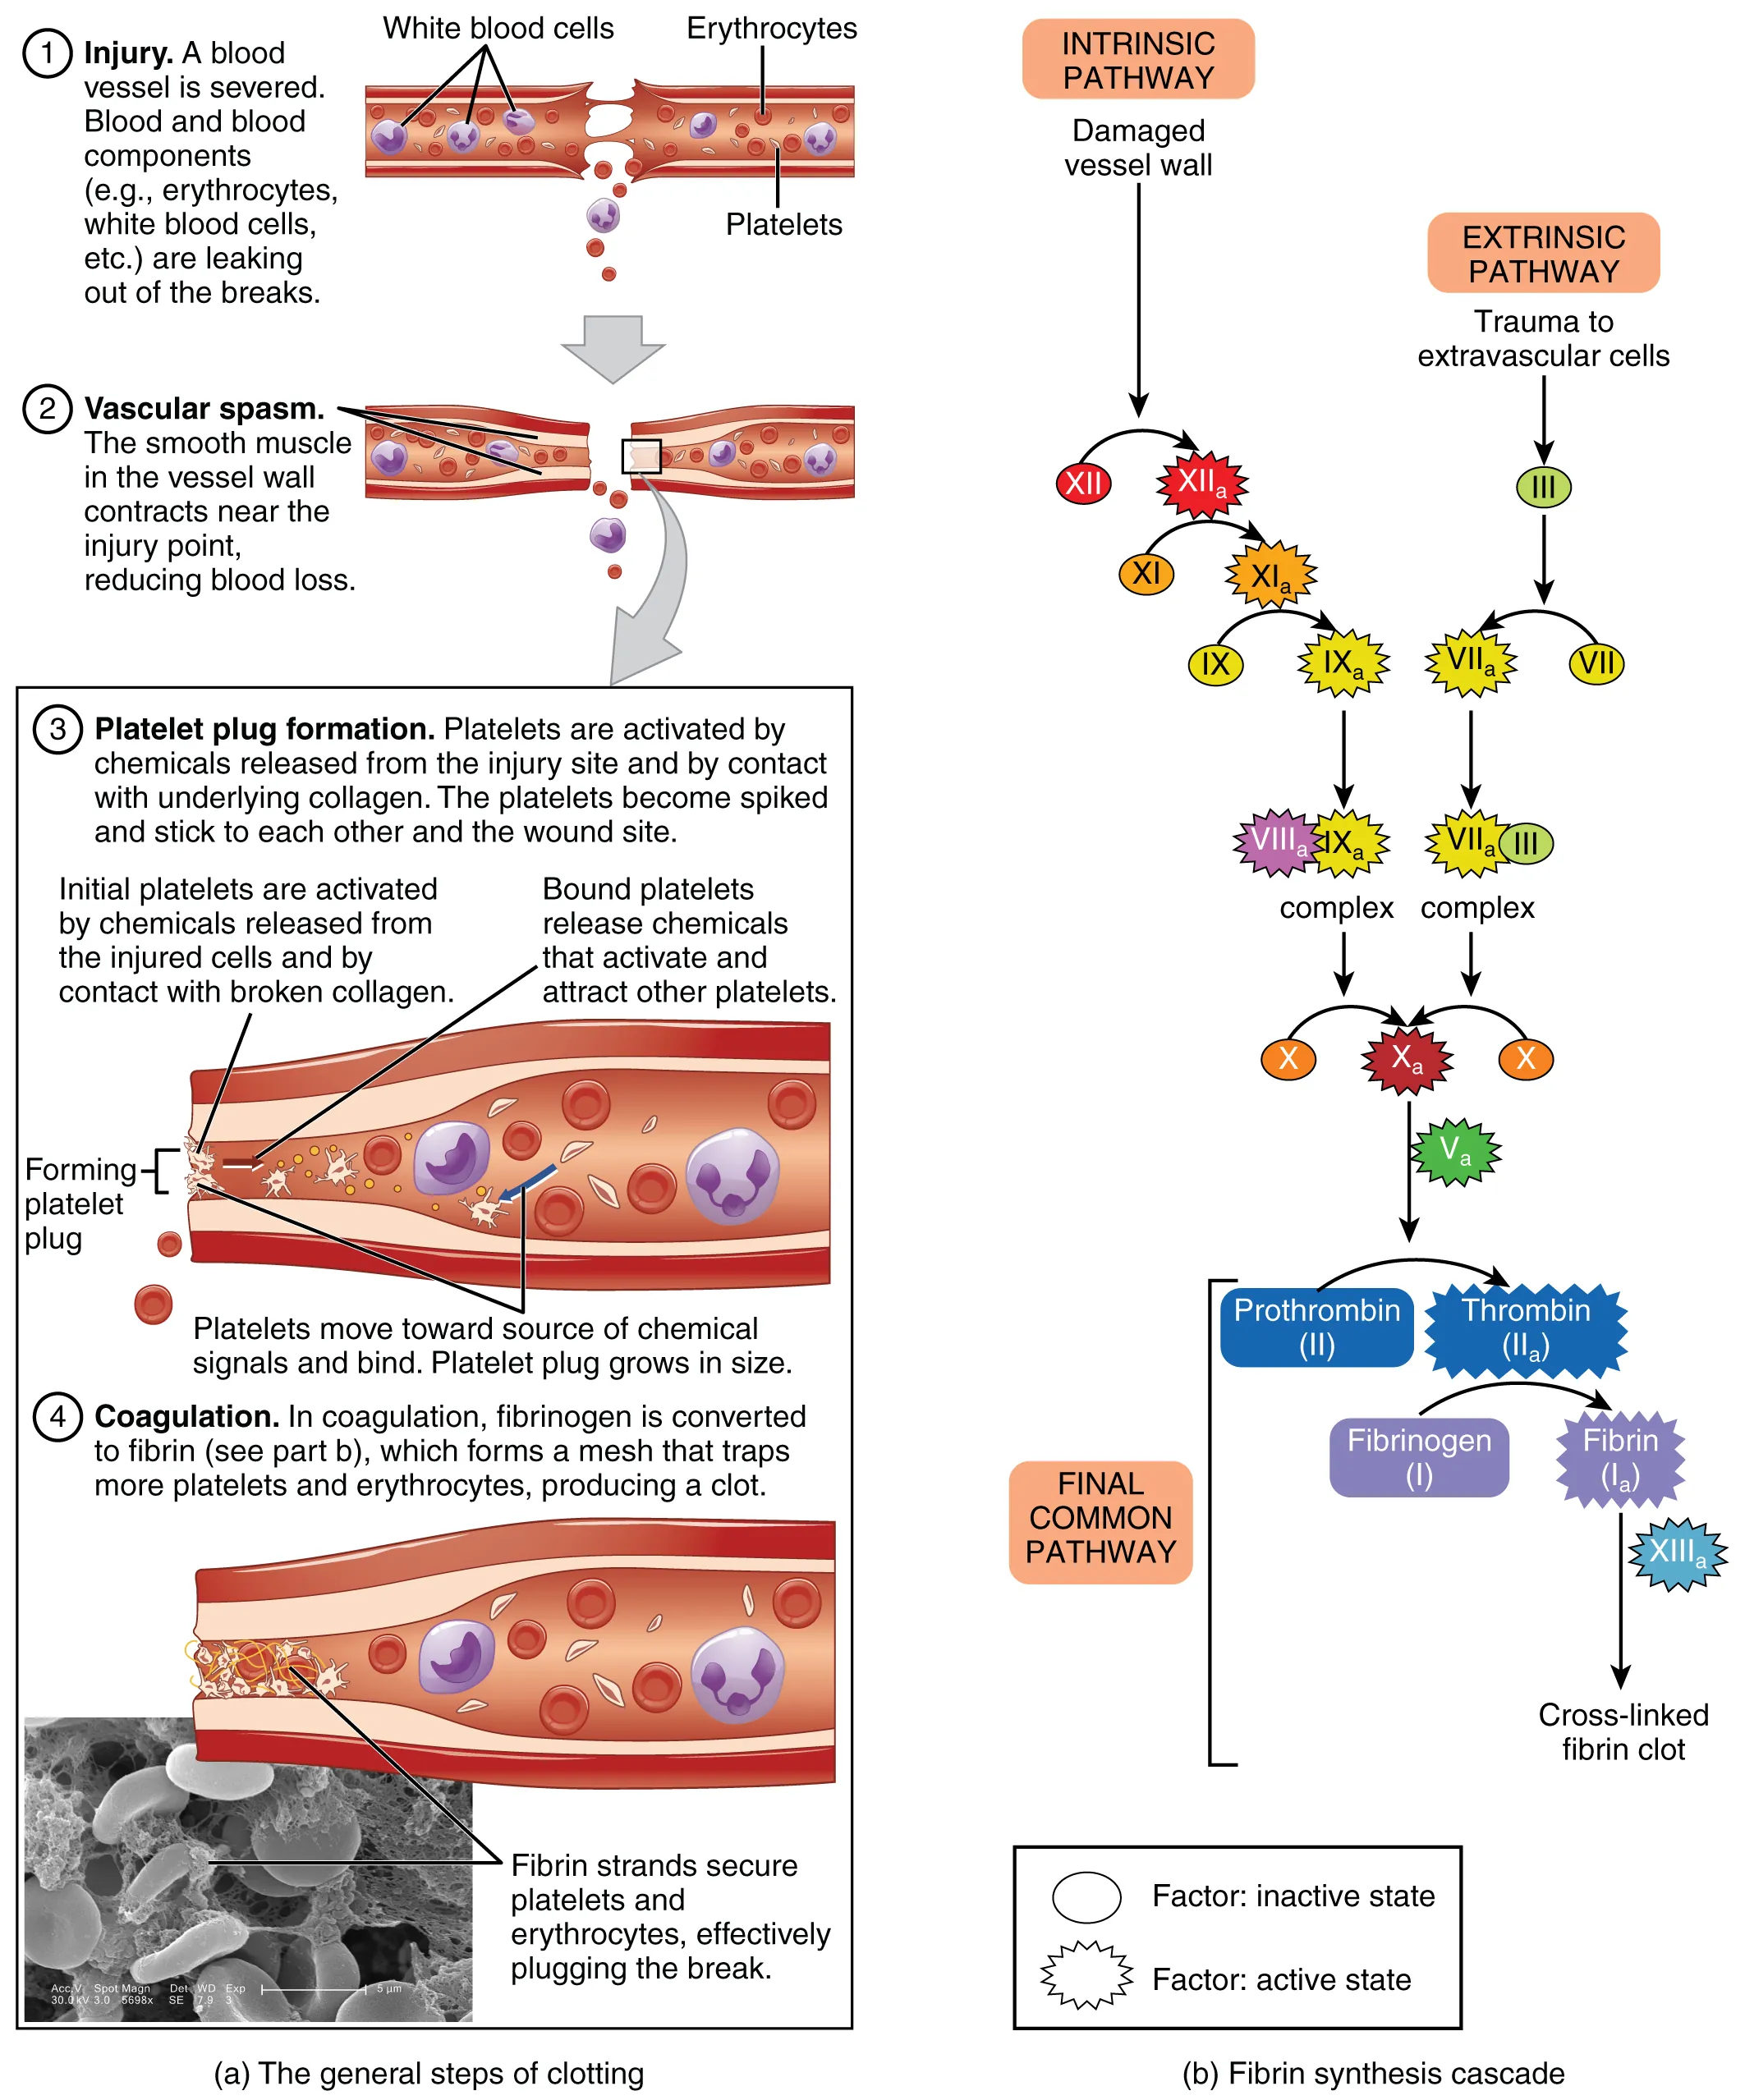 This figure details the steps in the clotting of blood. Each step is shown along with a detailed text box describing the steps on the left. On the right, a signaling pathway shows the different chemical signals involved in the clotting process.